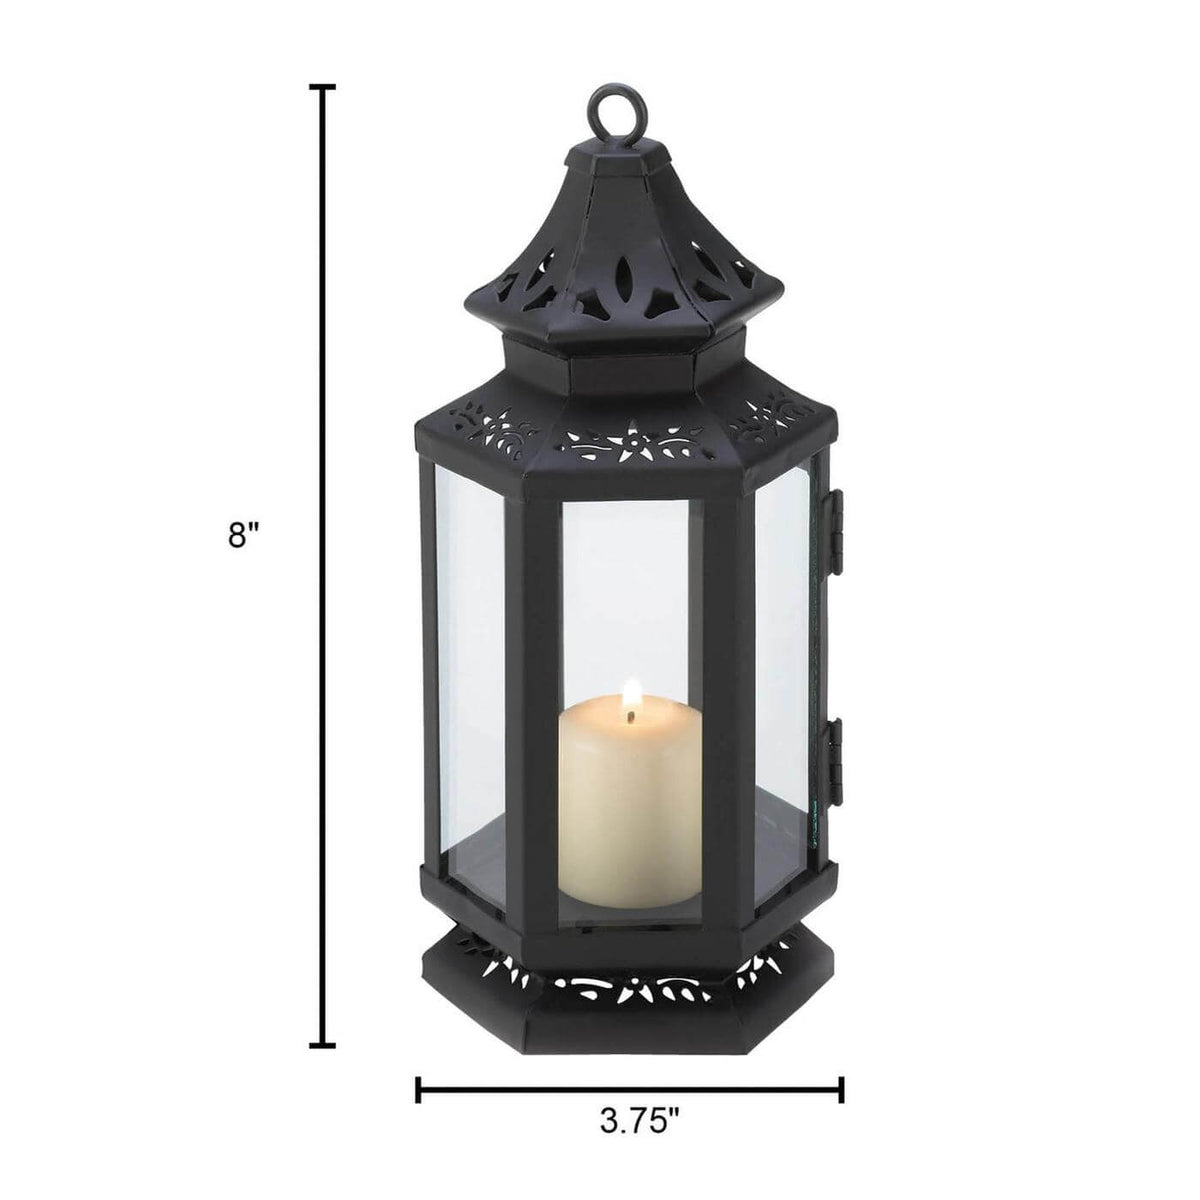 Black Stagecoach Lantern - The House of Awareness